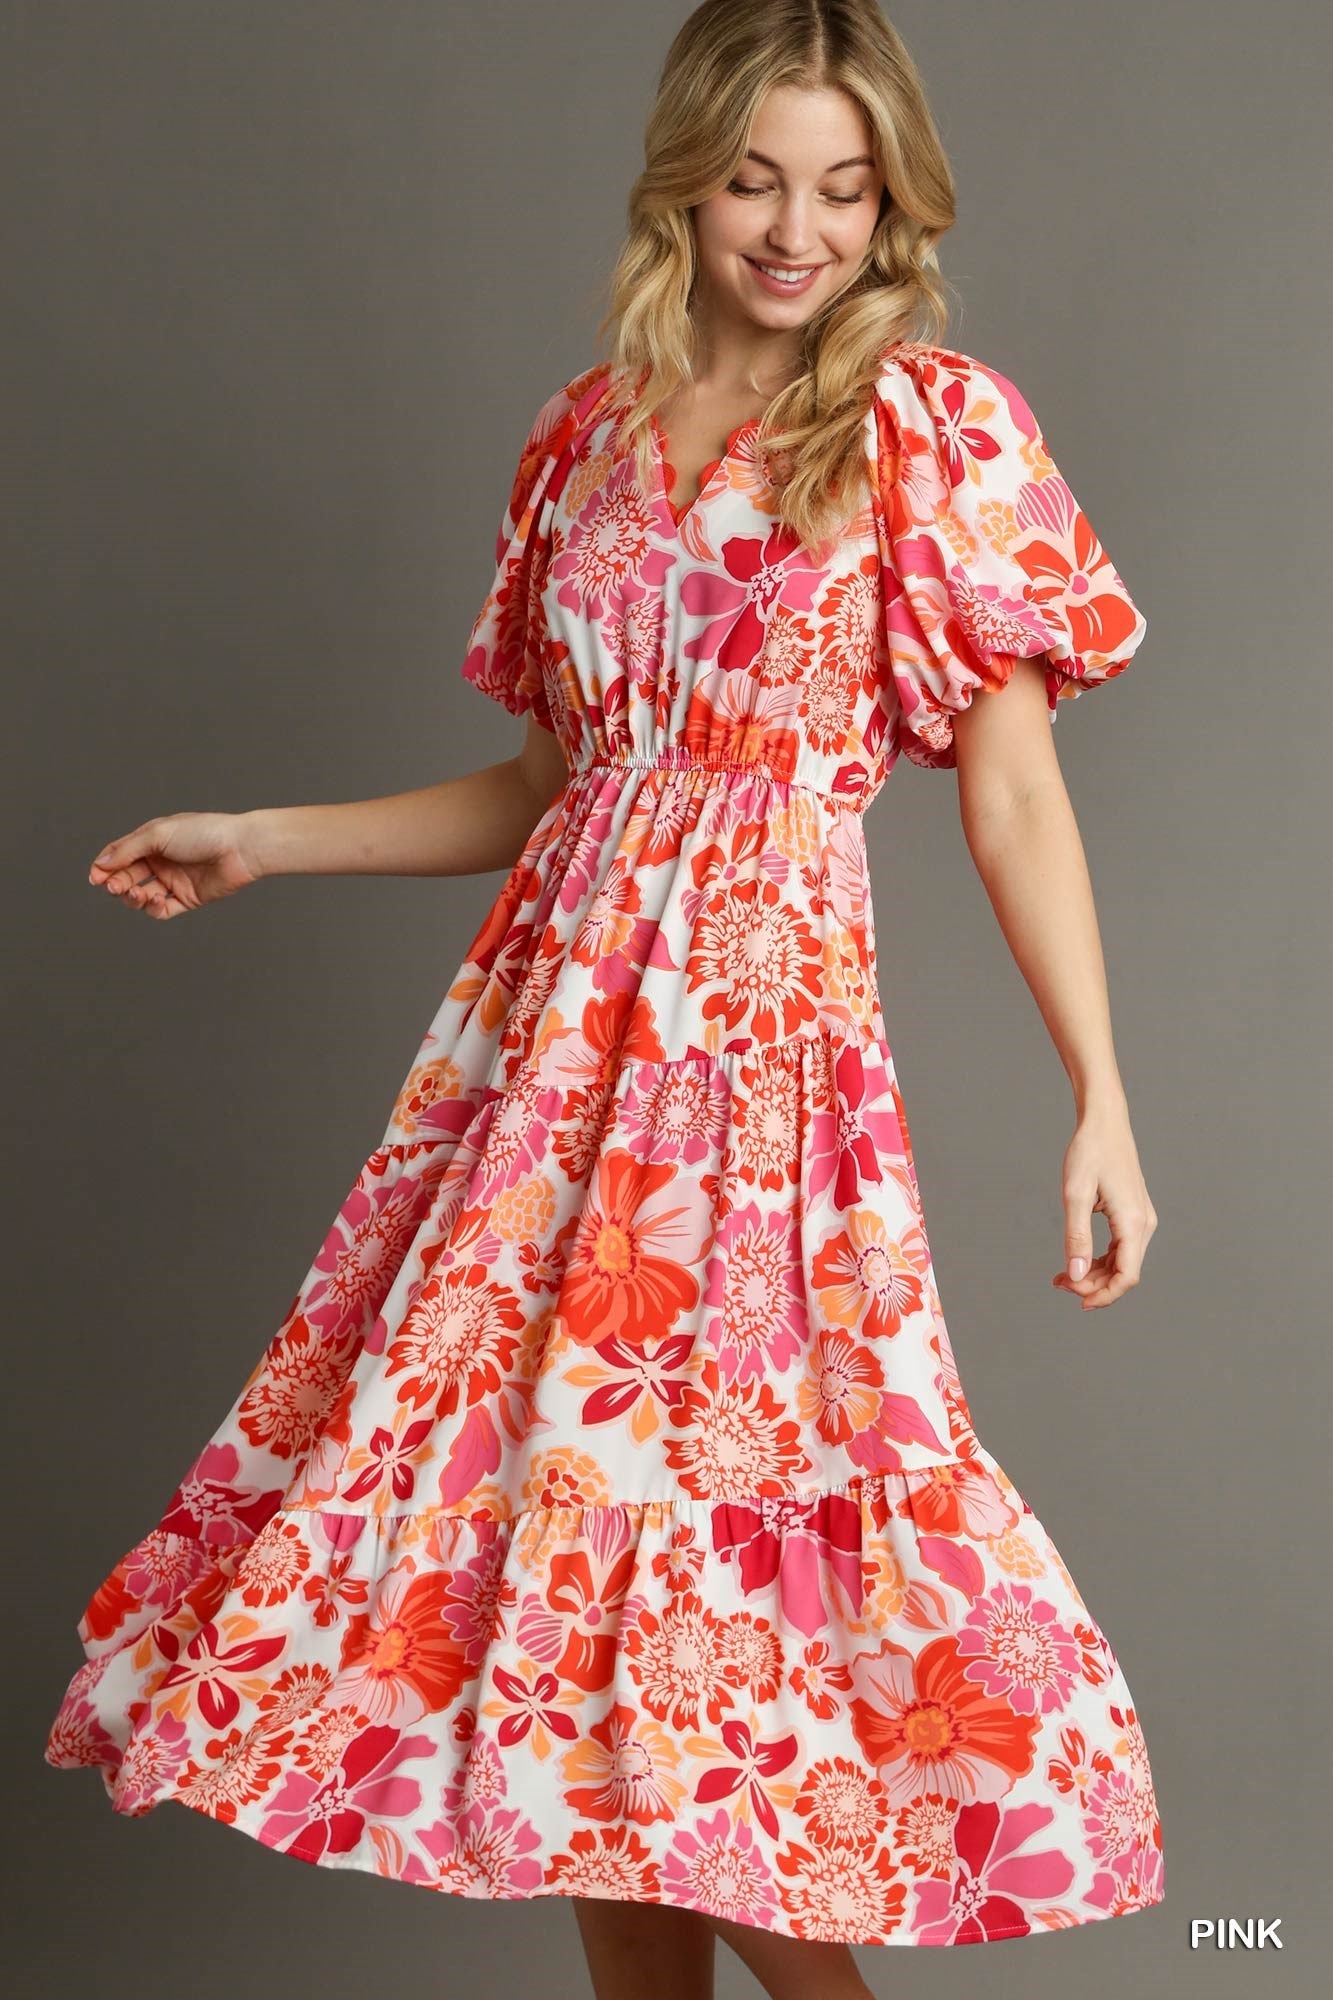 Pink & Red on White Floral Print Tiered Dress